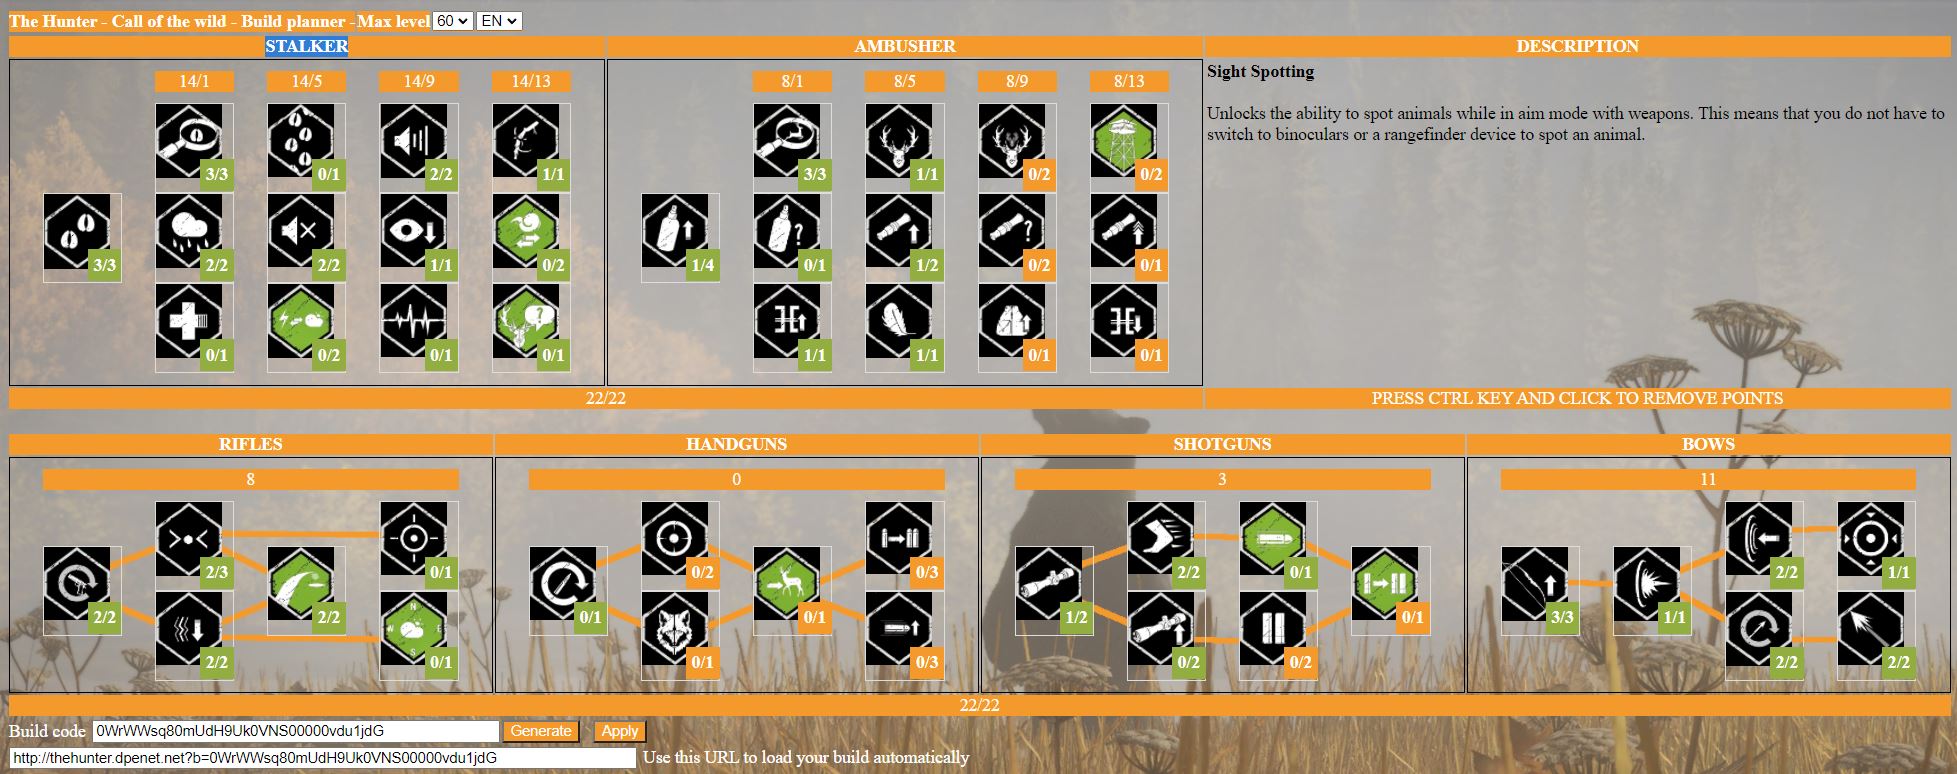 theHunter: Call of the Wild™ - Basic Web Planner for Skills & Perks - Introduction - 826E502